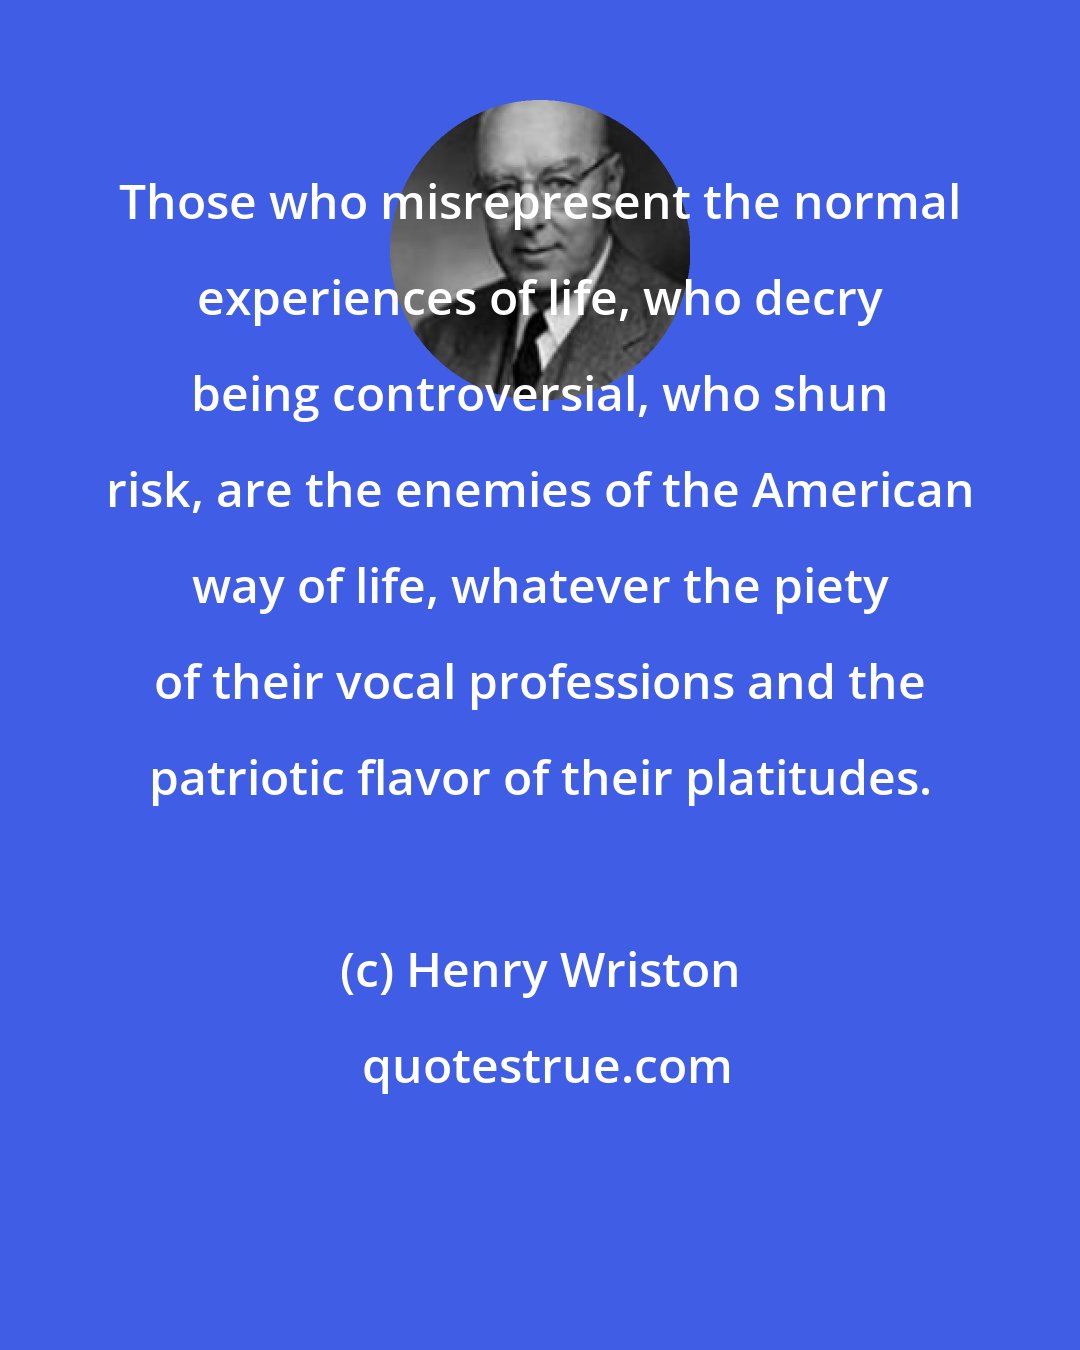 Henry Wriston: Those who misrepresent the normal experiences of life, who decry being controversial, who shun risk, are the enemies of the American way of life, whatever the piety of their vocal professions and the patriotic flavor of their platitudes.